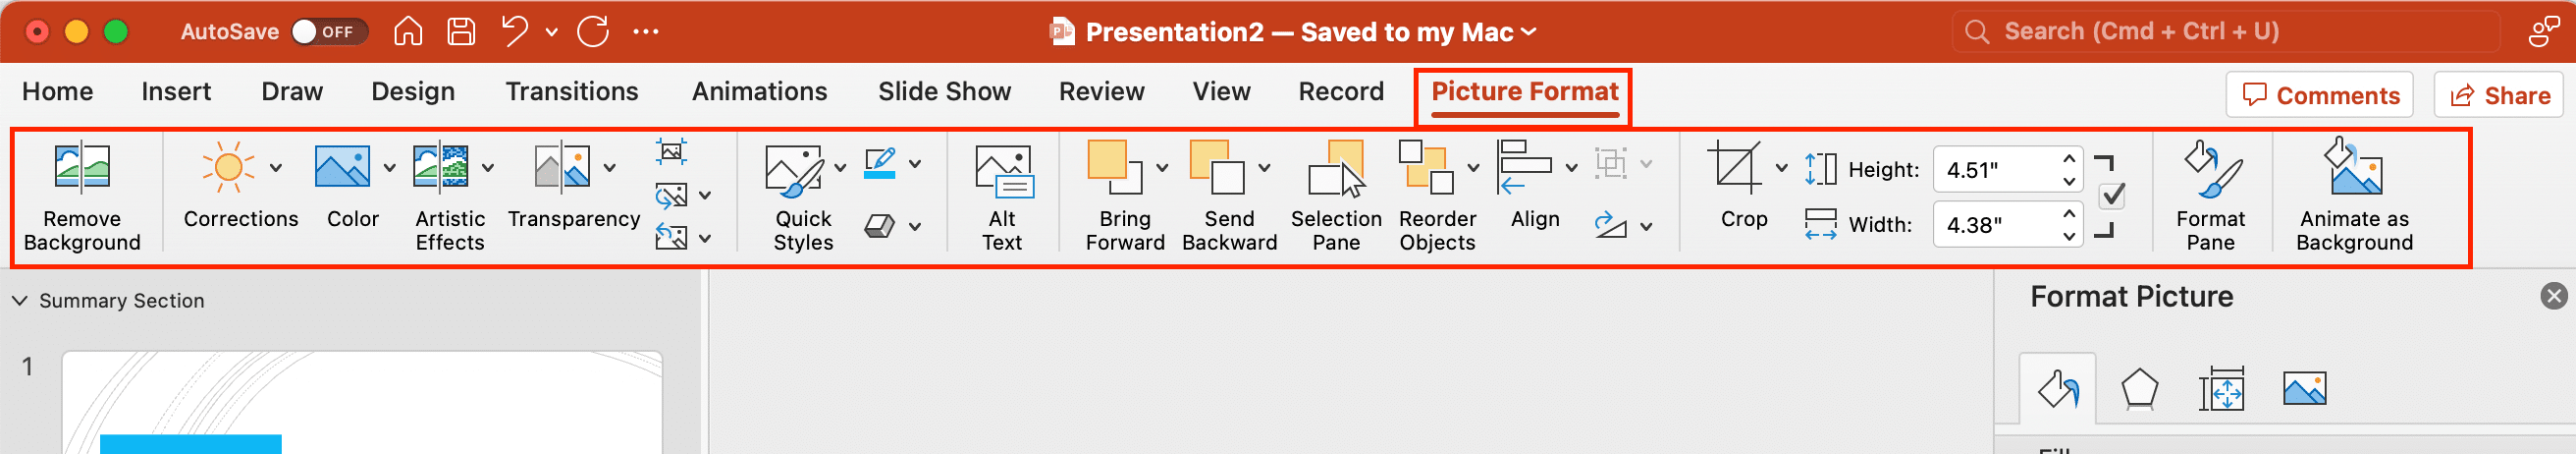 Picture format options in PowerPoint